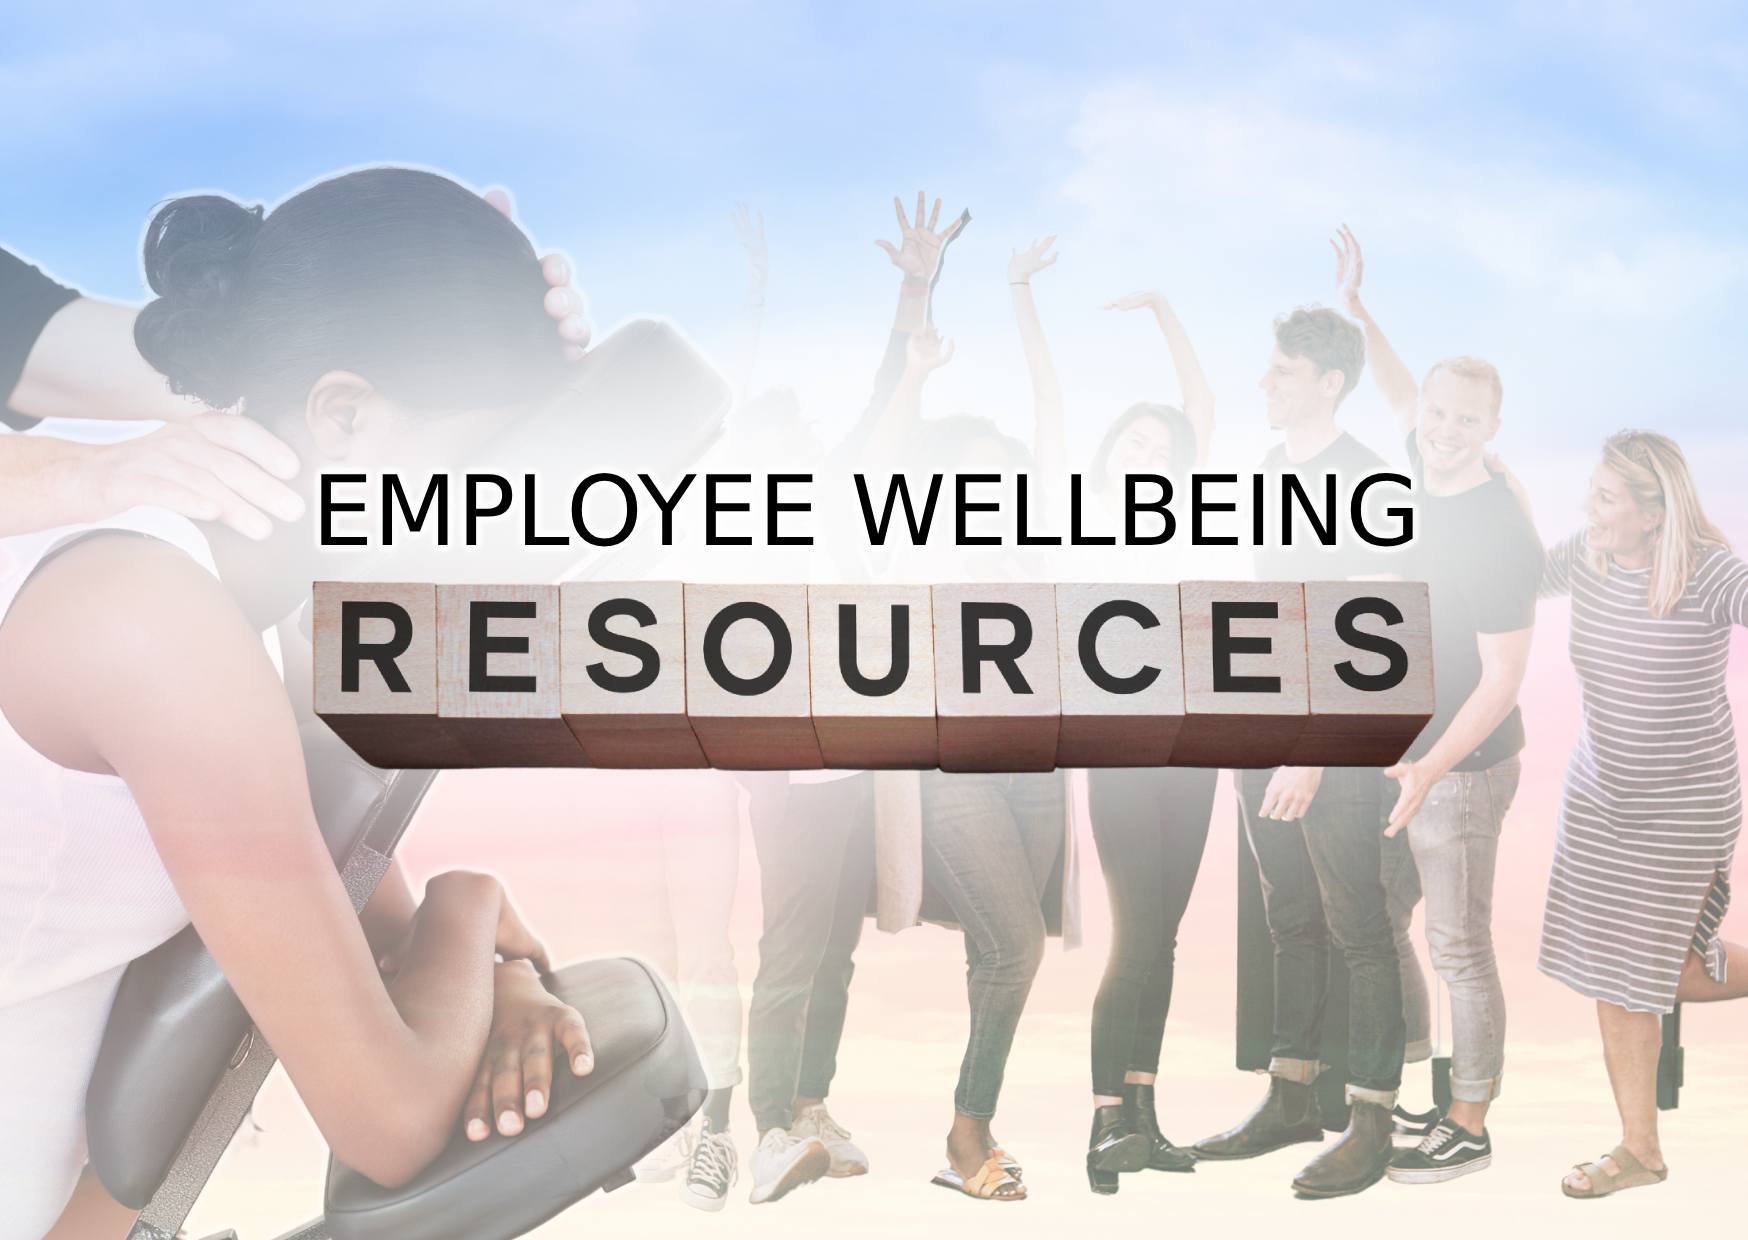 EMPLOYEE-WELLBEING-RESOURCES